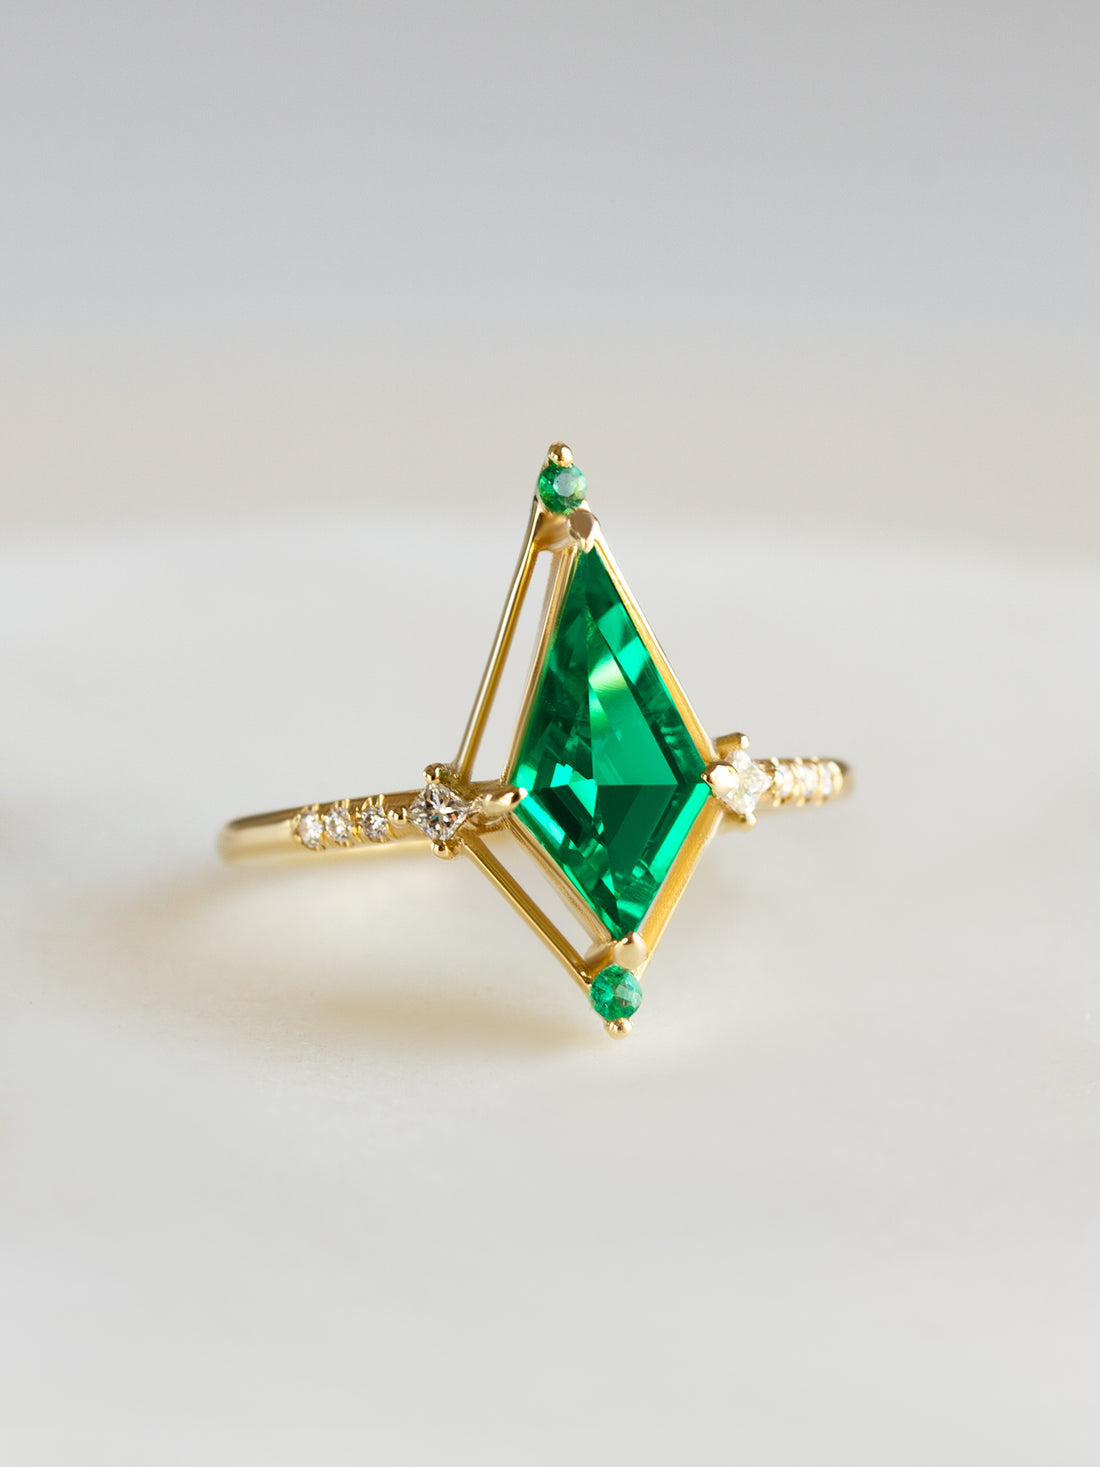 hiddenspace-engagement-ring-emerald-dawn-ring-proposal-unique-finejewelry5